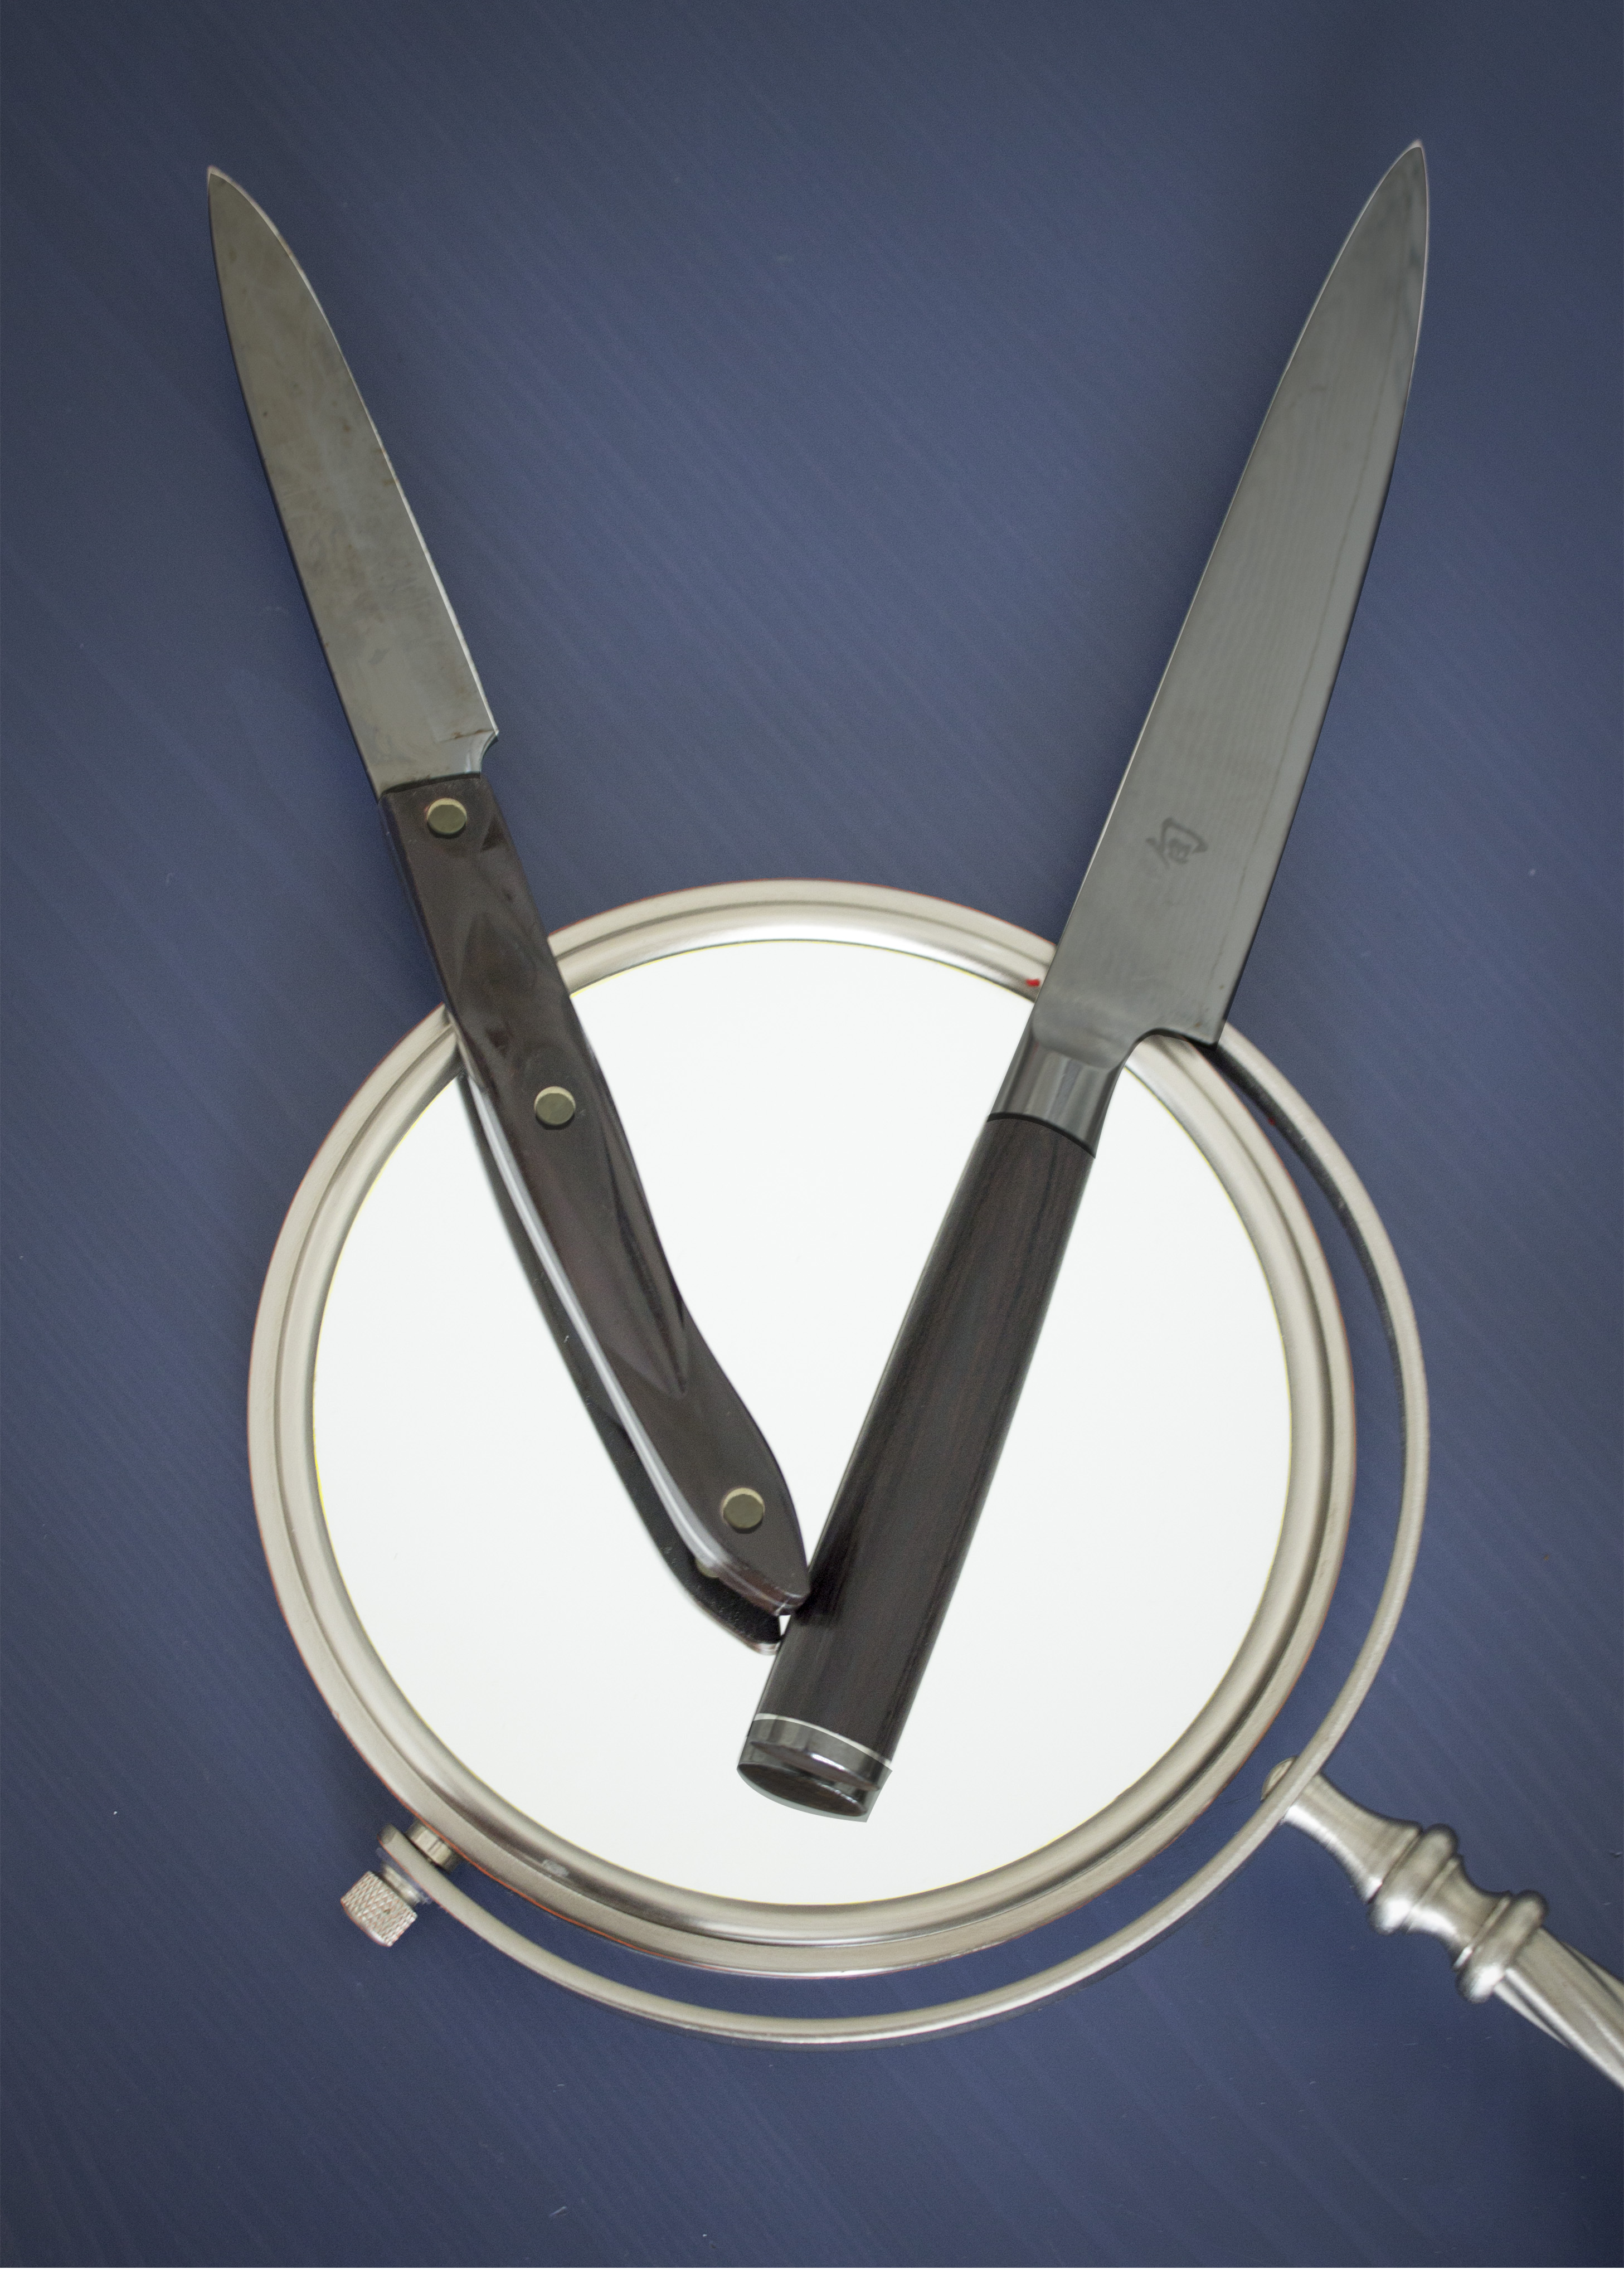 A mirror with 2 scissors over it like the hands of a clock. It is laying on a dark blue table.